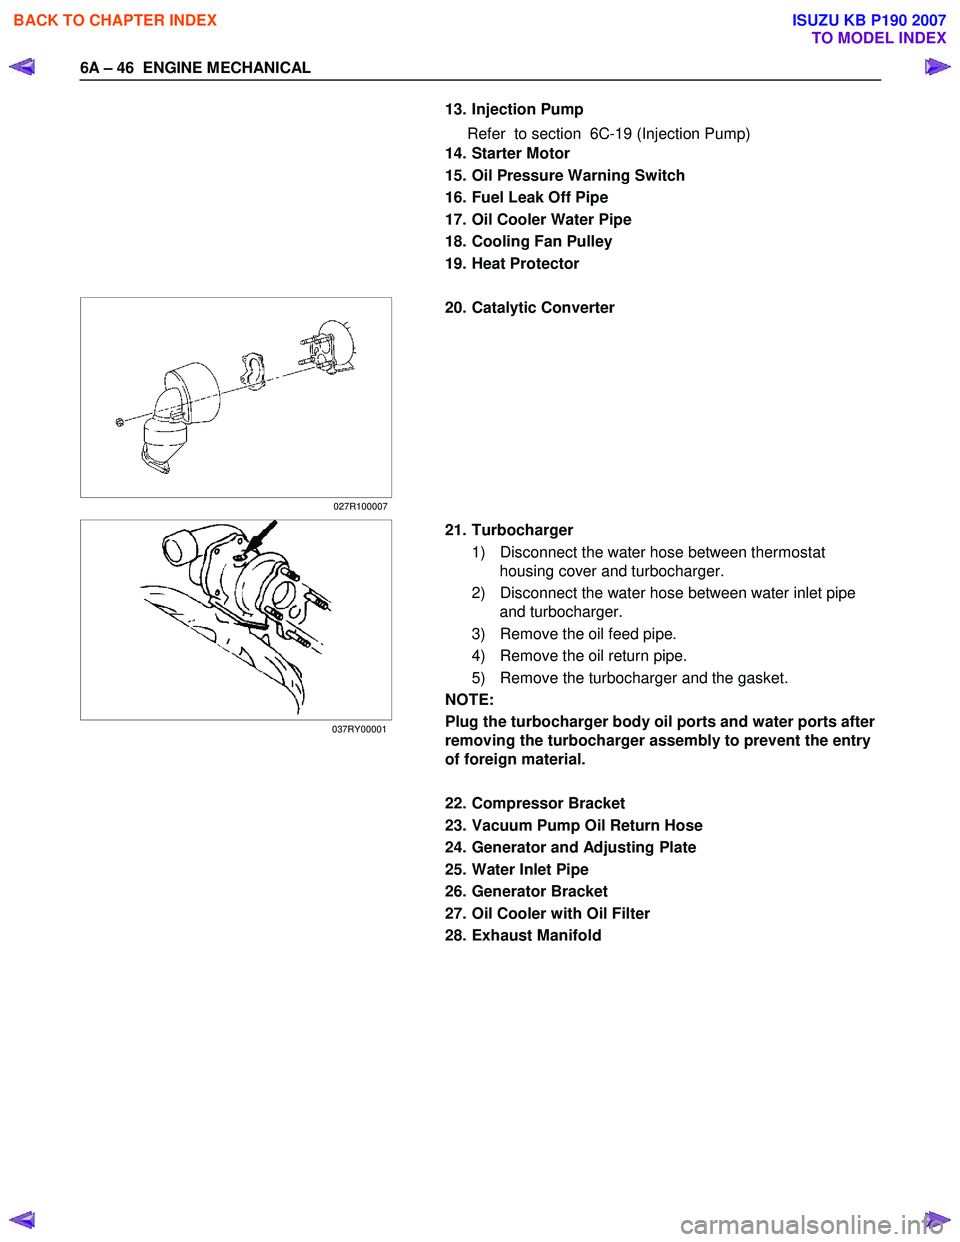 ISUZU KB P190 2007  Workshop Owners Manual 6A – 46  ENGINE MECHANICAL 
  13. Injection Pump  
  Refer  to section  6C-19 (Injection Pump) 
 
 14. Starter Motor 
  15. Oil Pressure Warning Switch 
  16. Fuel Leak Off Pipe 
  17. Oil Cooler Wa